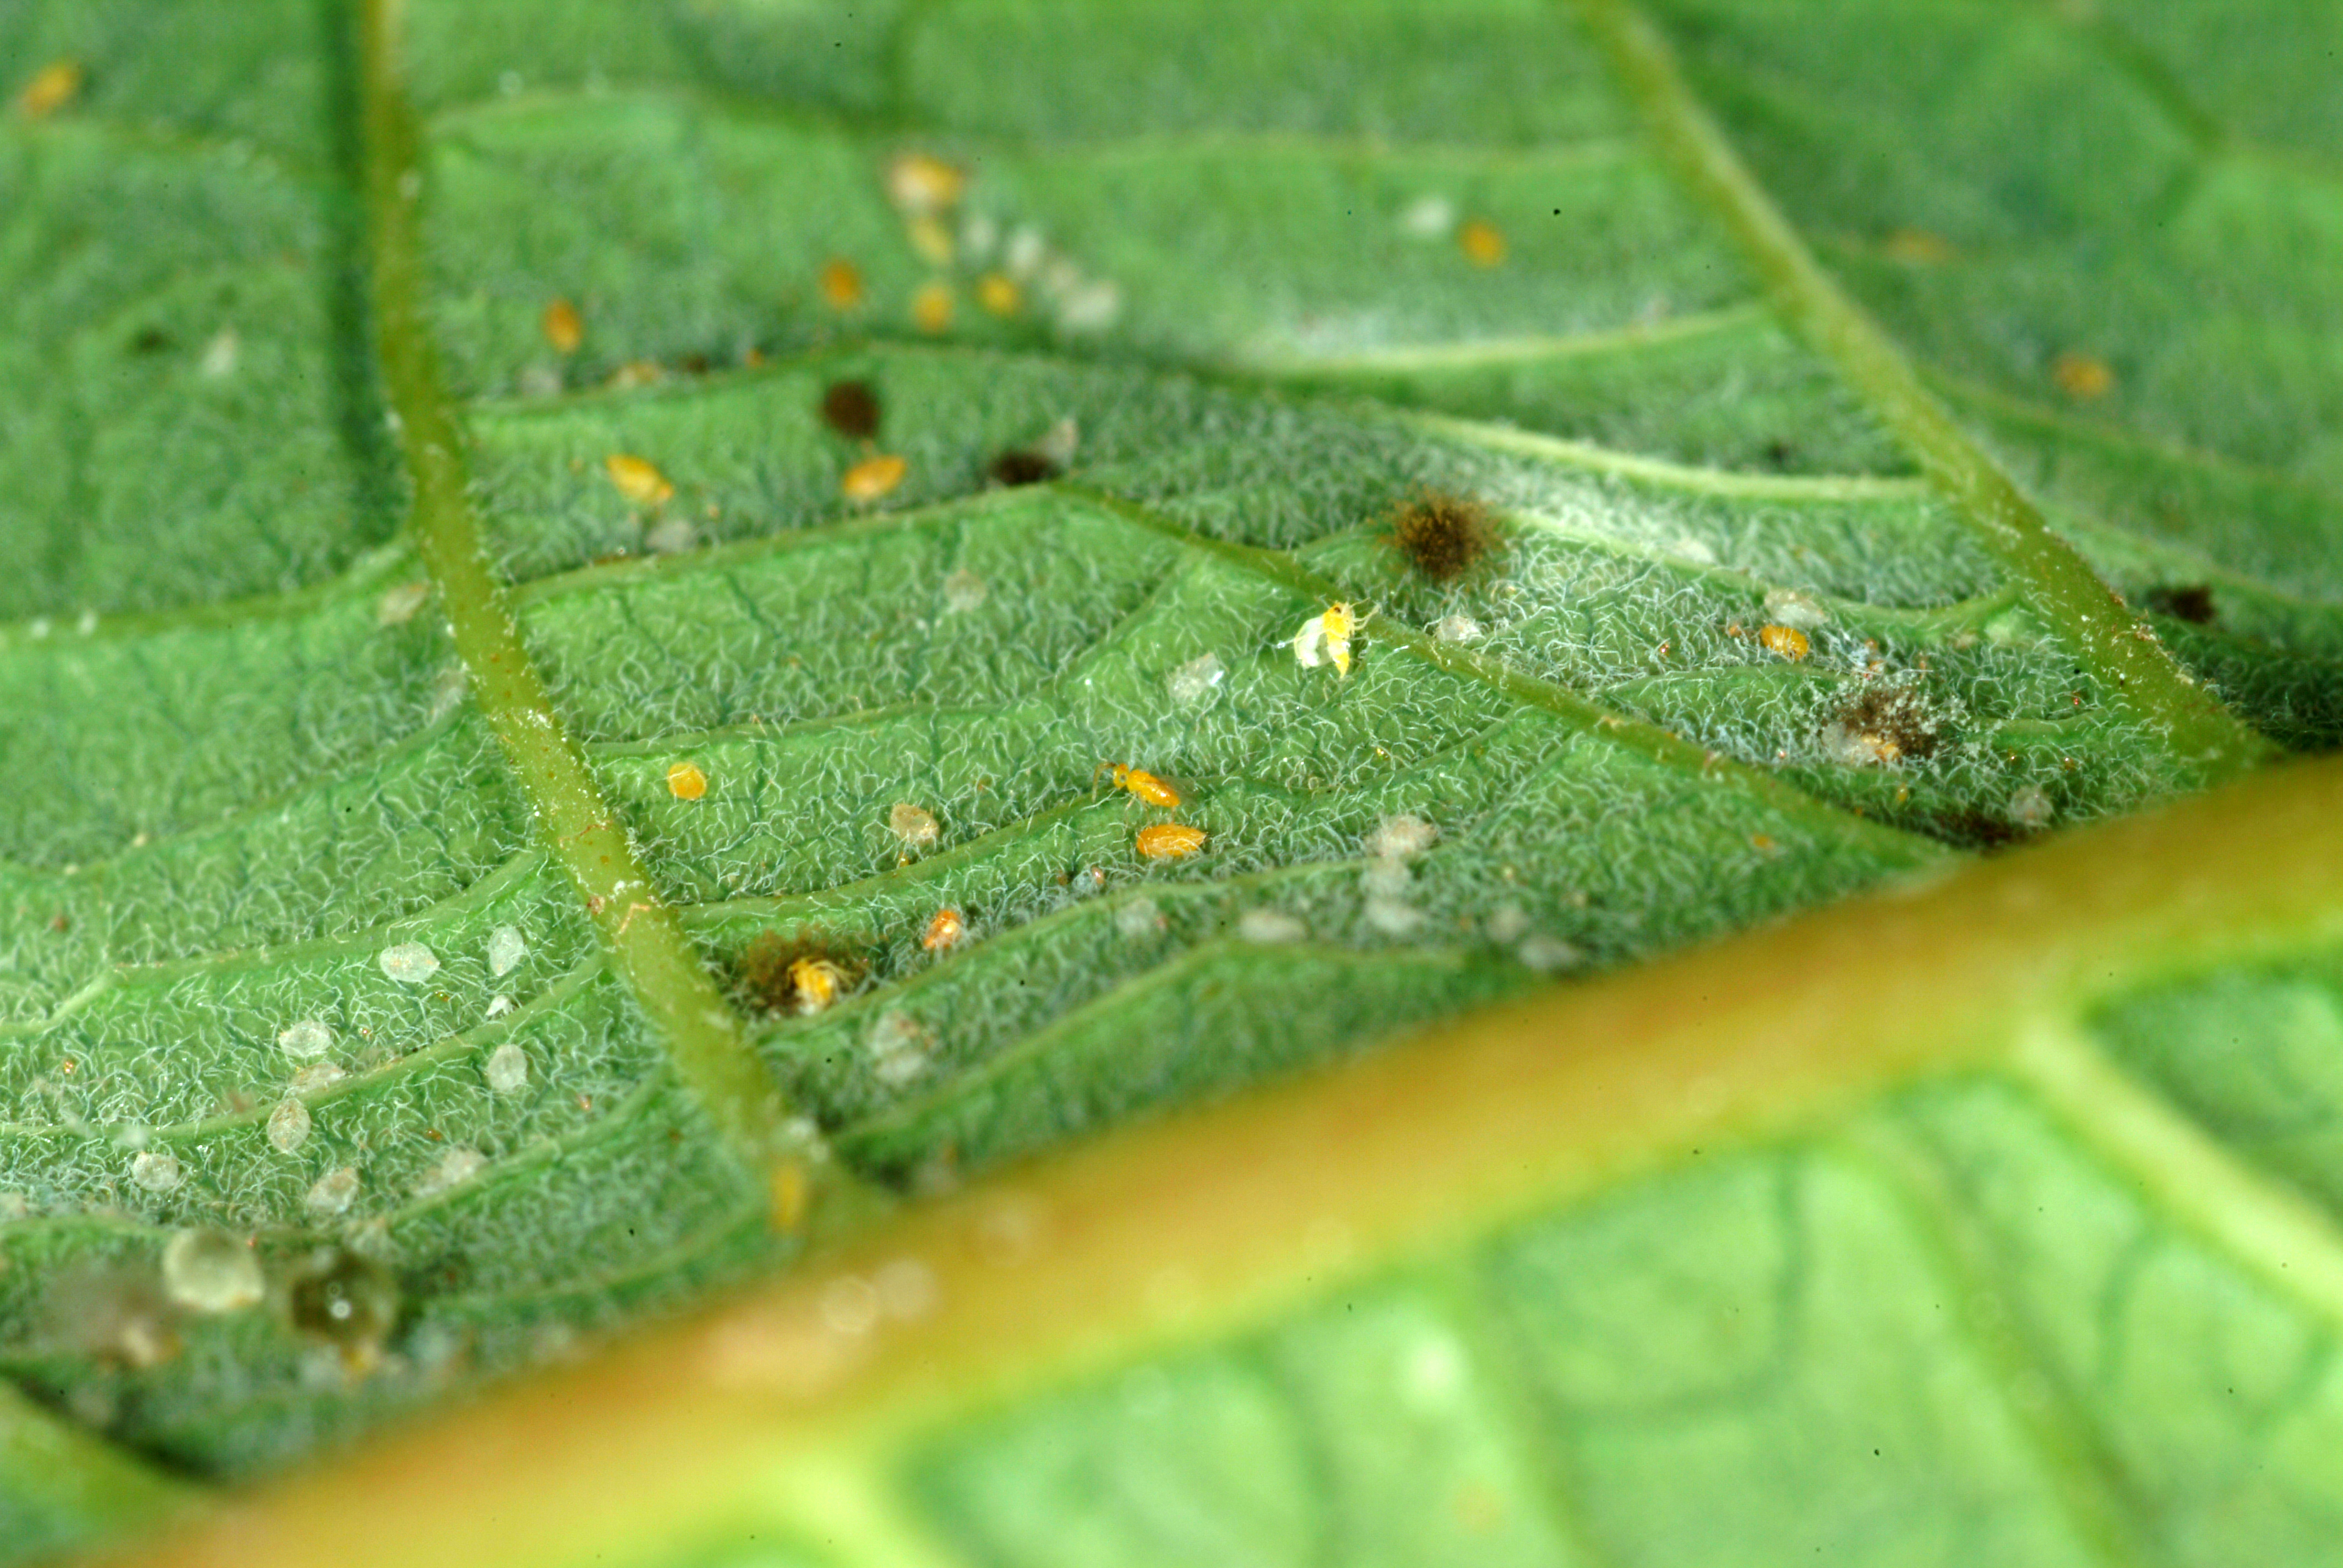 The tiny yellow Eretmocerus are stingless parasitic wasps that lay eggs inside silverleaf whitefly nymphs.